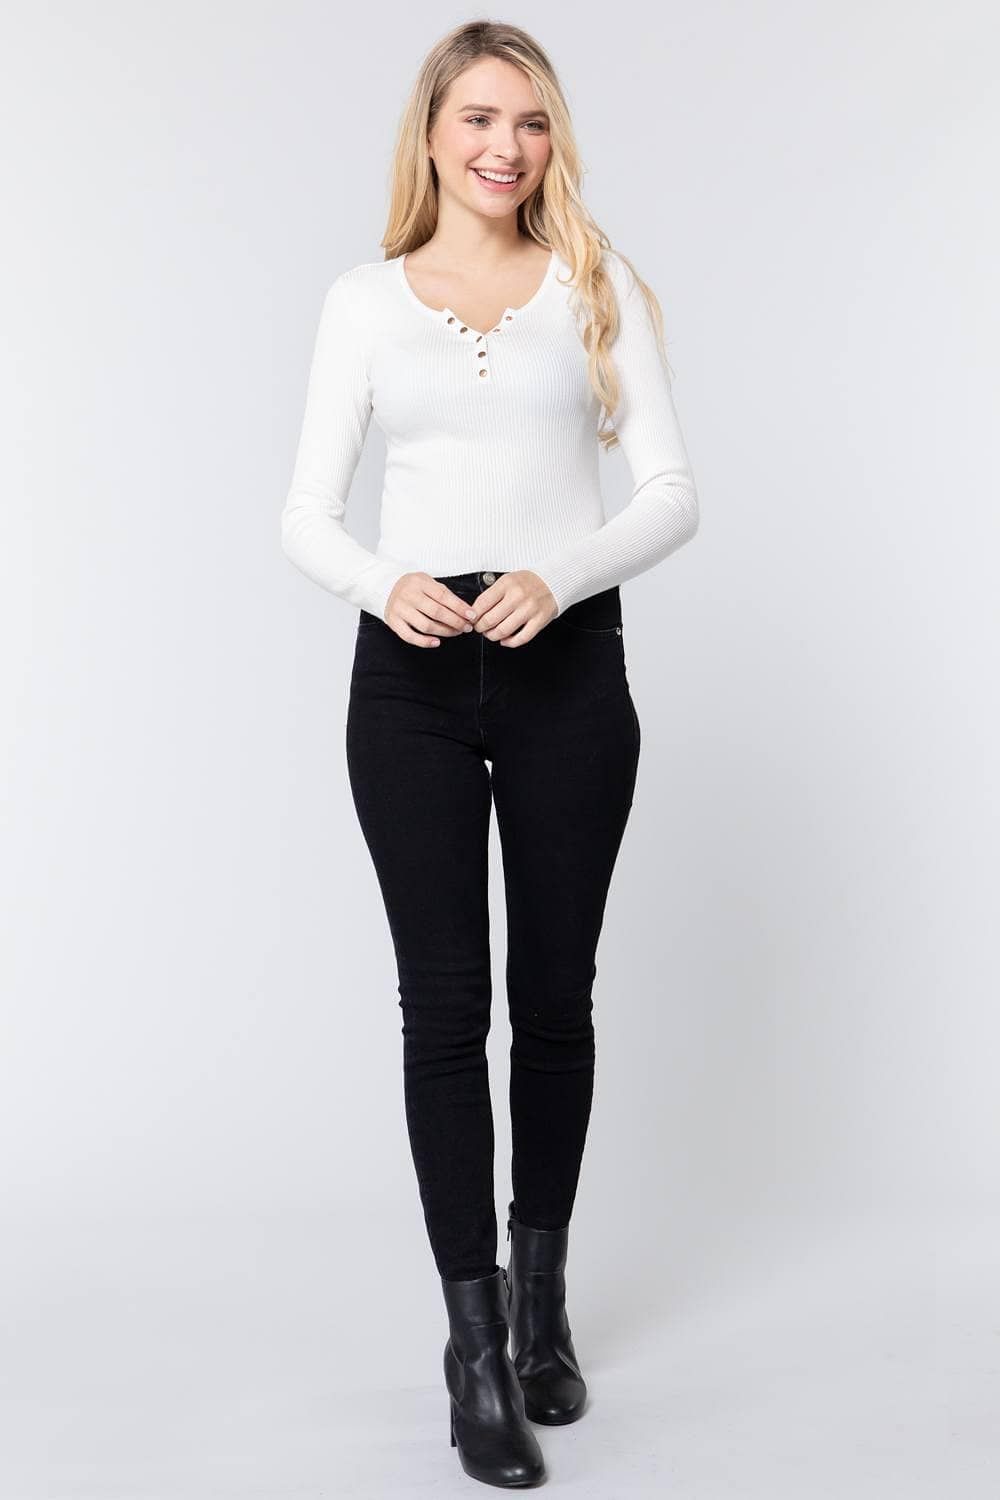 Off-White Long Sleeve V-Neck Sweater - Shopping Therapy, LLC 